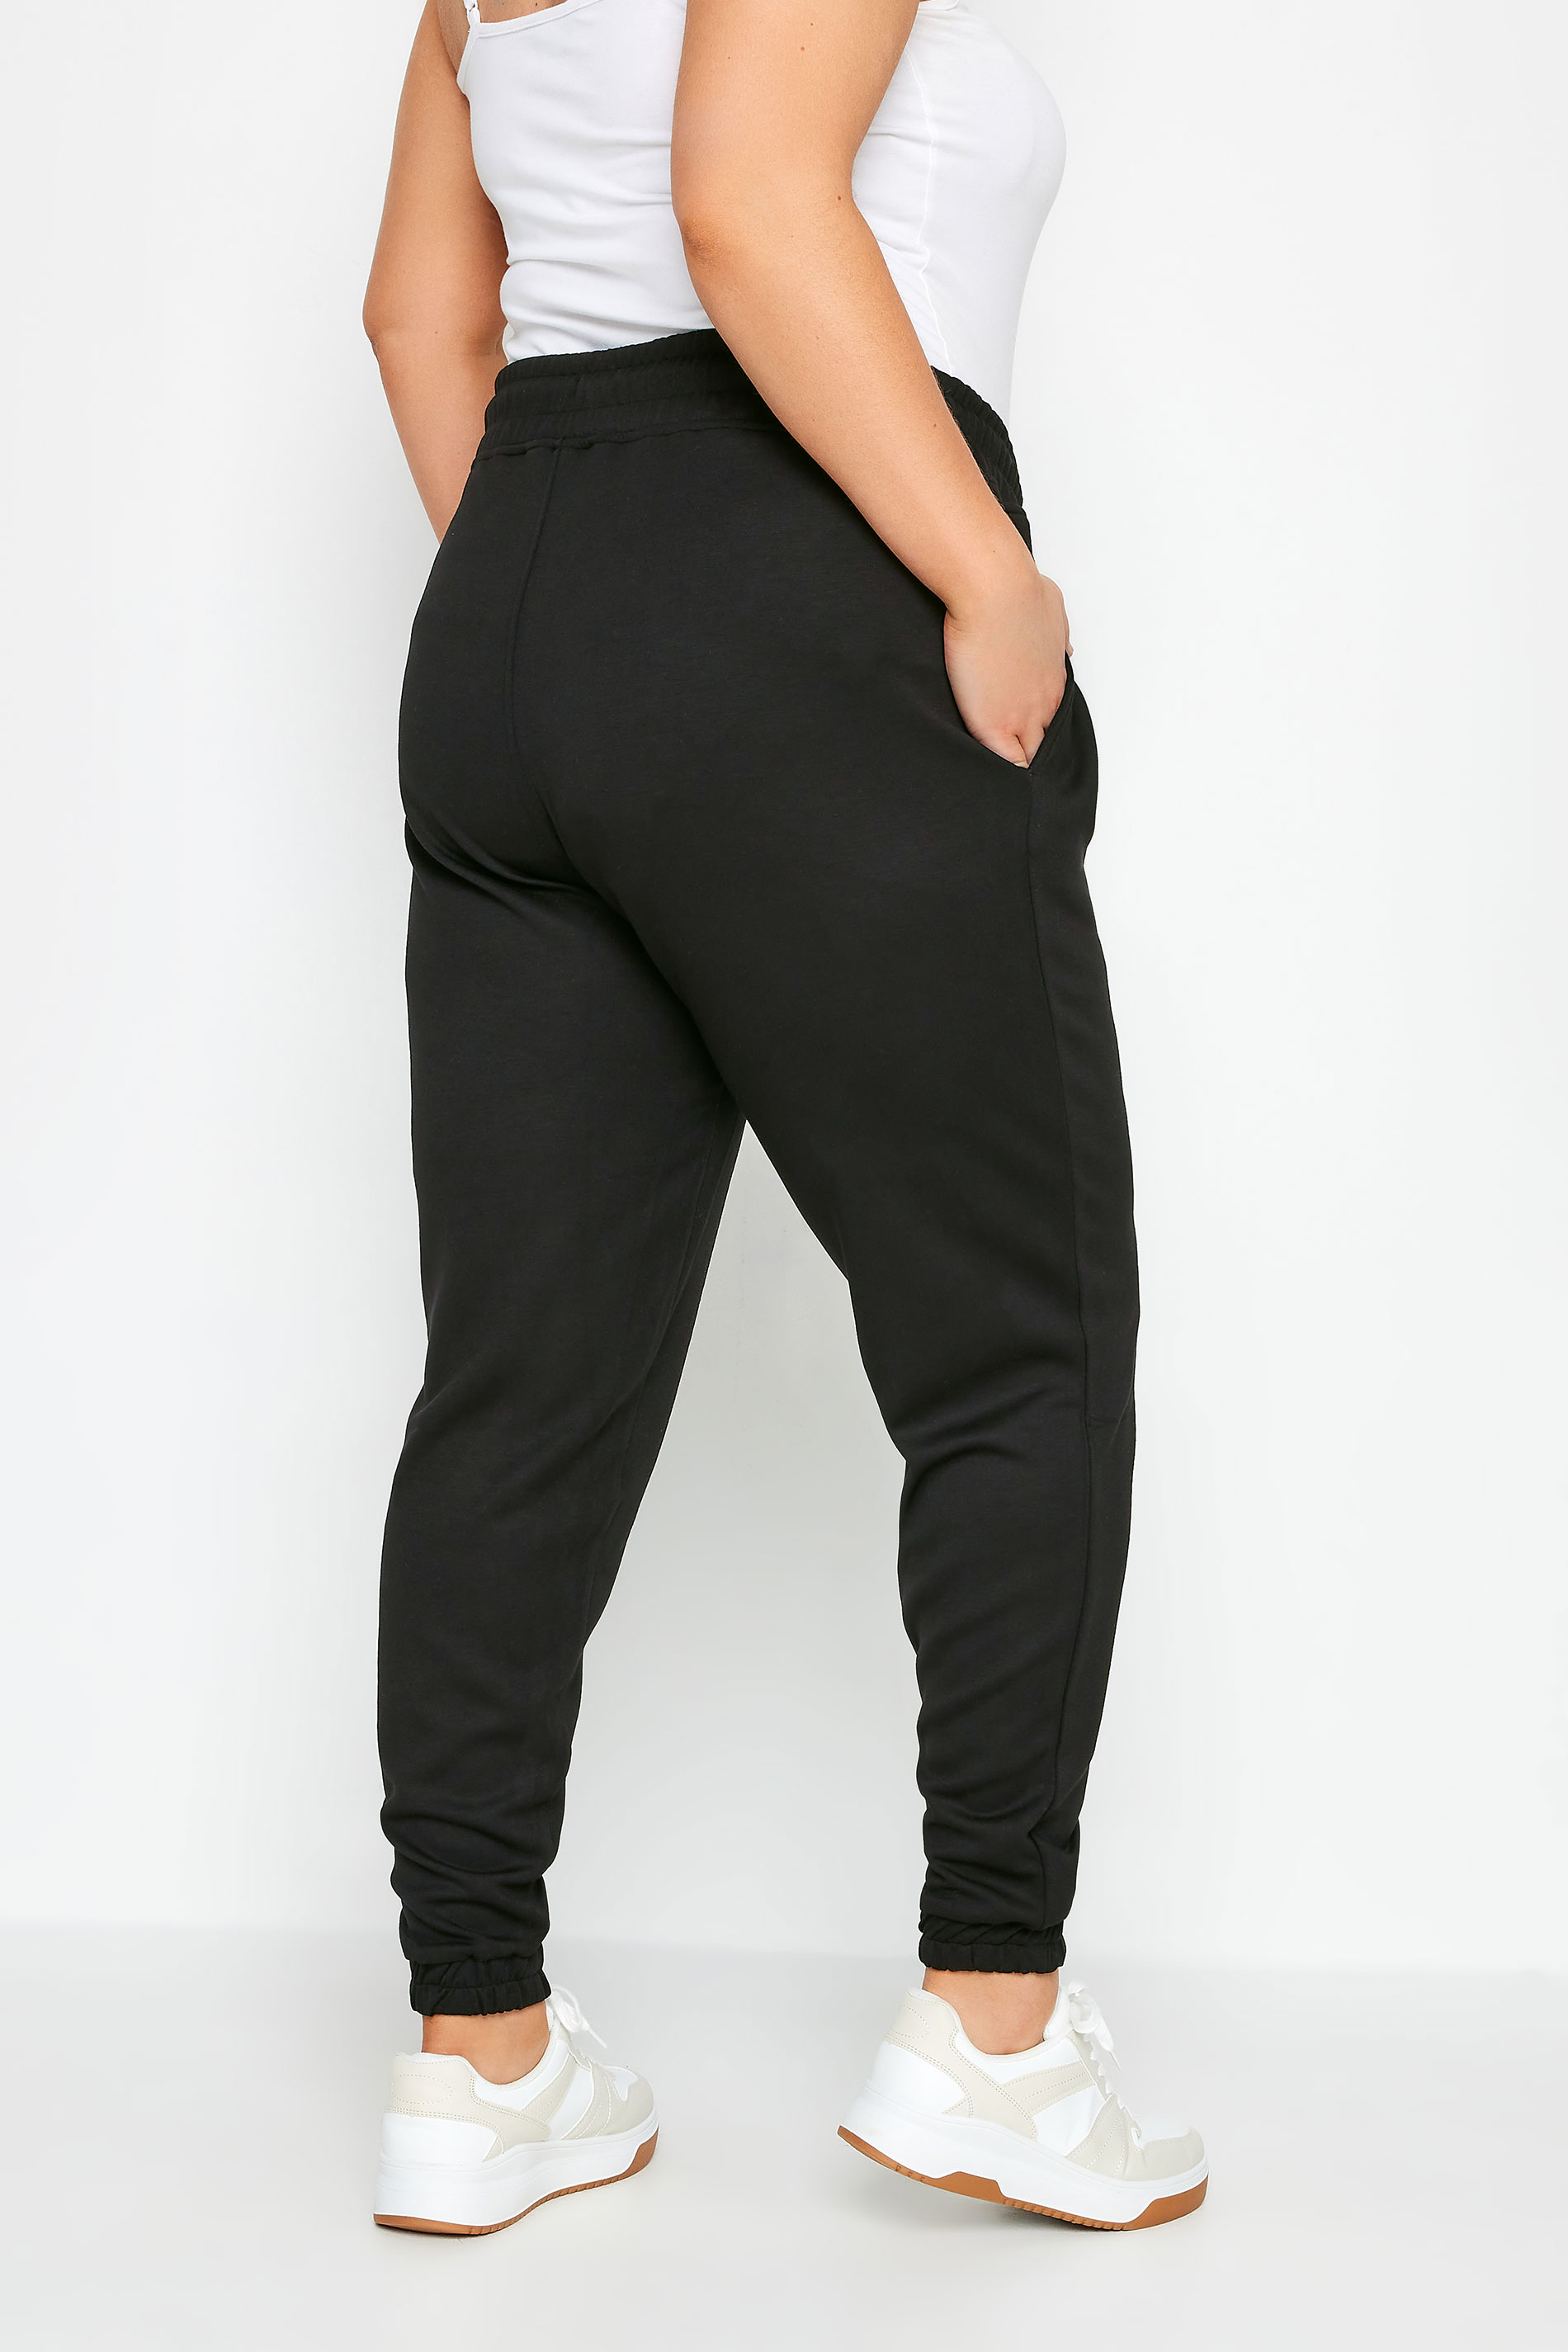 YOURS Plus Size Black Elasticated Joggers | Yours Clothing 3